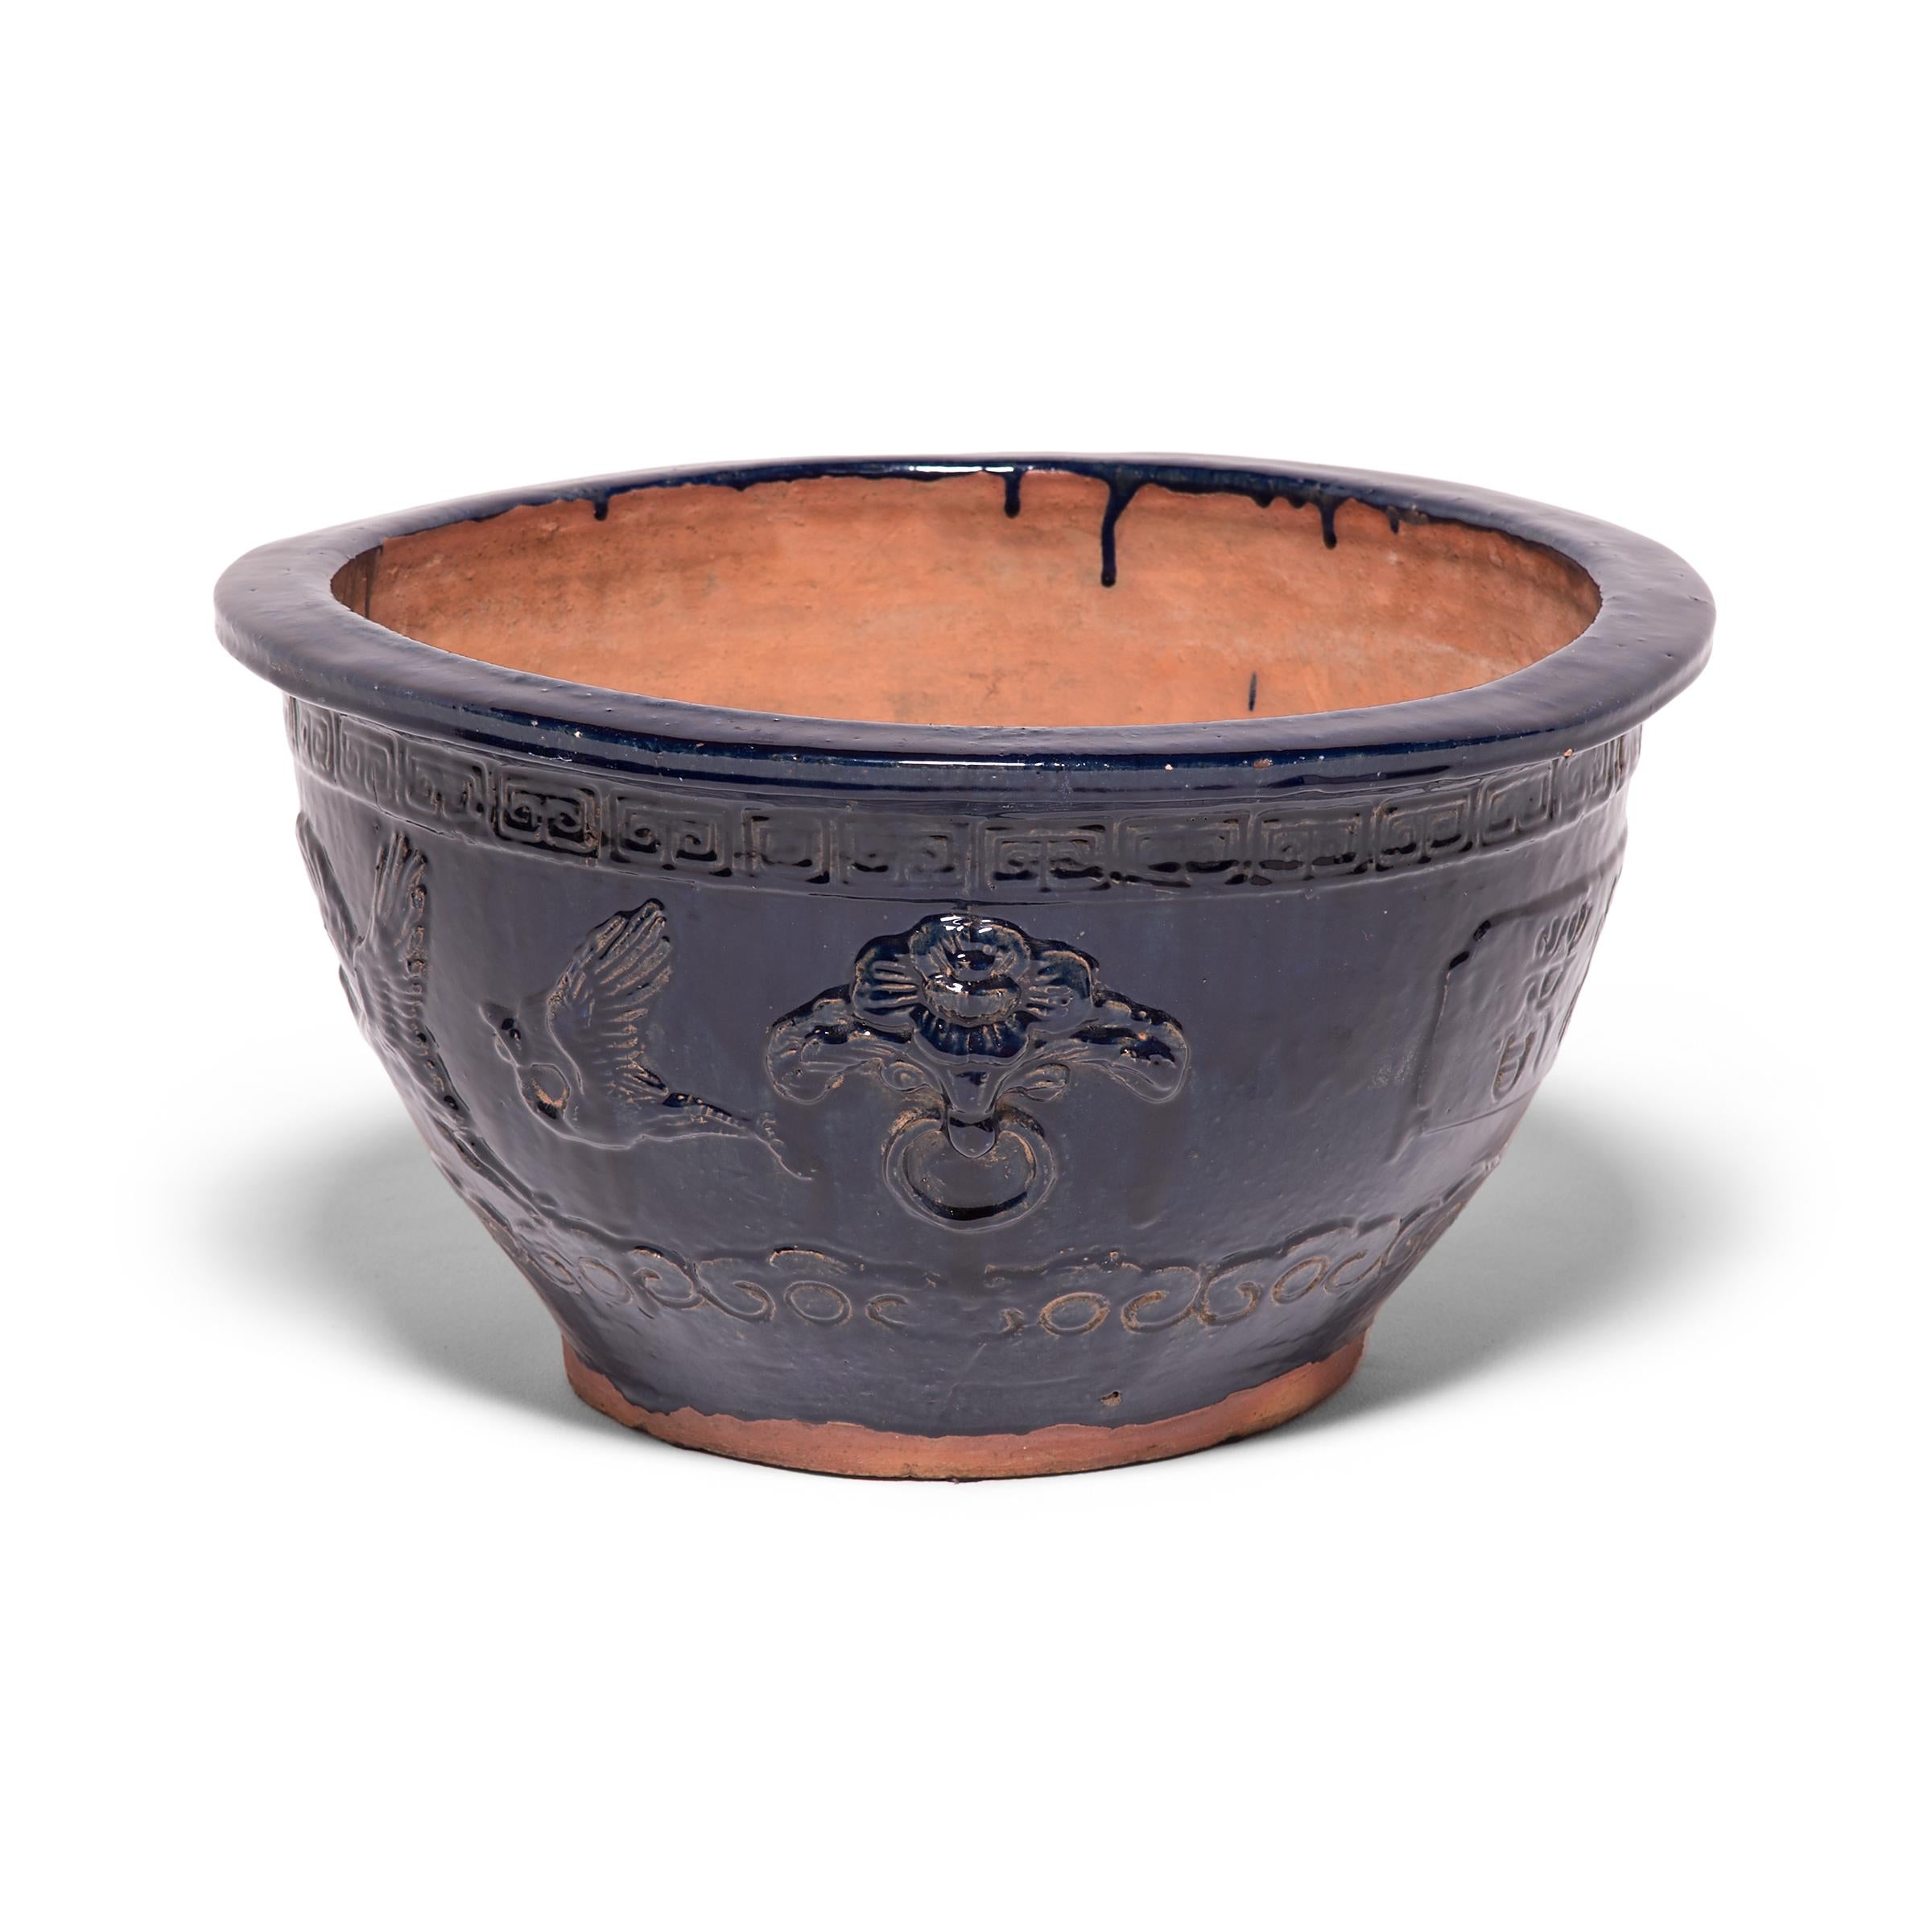 This shallow terracotta bowl is delicately decorated in low relief and cloaked in a monochrome layer of dark blue glaze. Framed by a Meander trim and billowing cloud motifs below, two cranes fly towards a pine tree with wings outspread. In